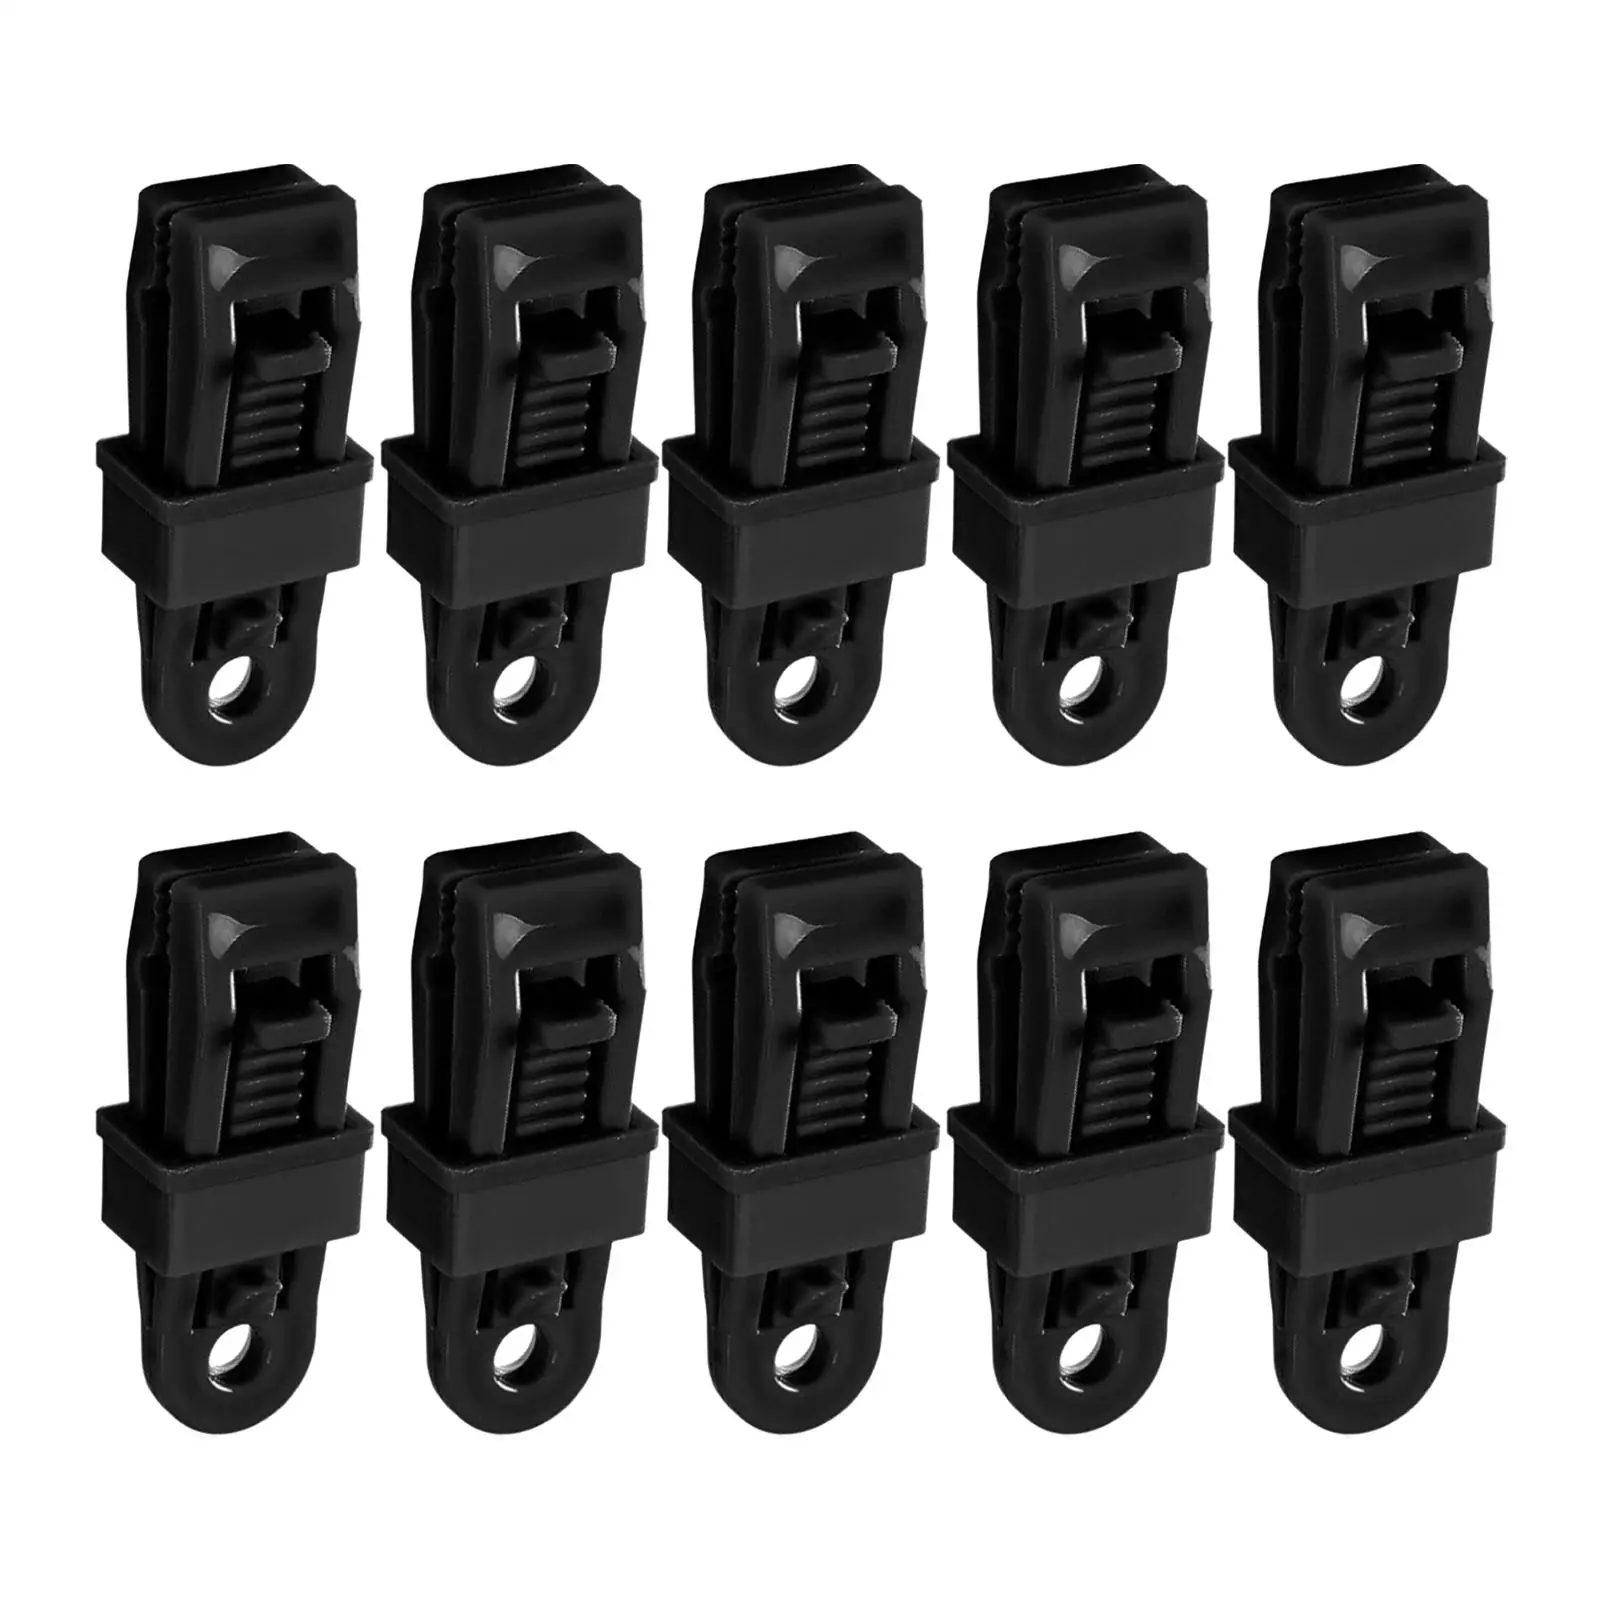 

Set of 10 Tent Awning Clamps for Camping Plastic Black Color Durable Easy Install Non Slip Widely Uses Outdoor Fix Clip